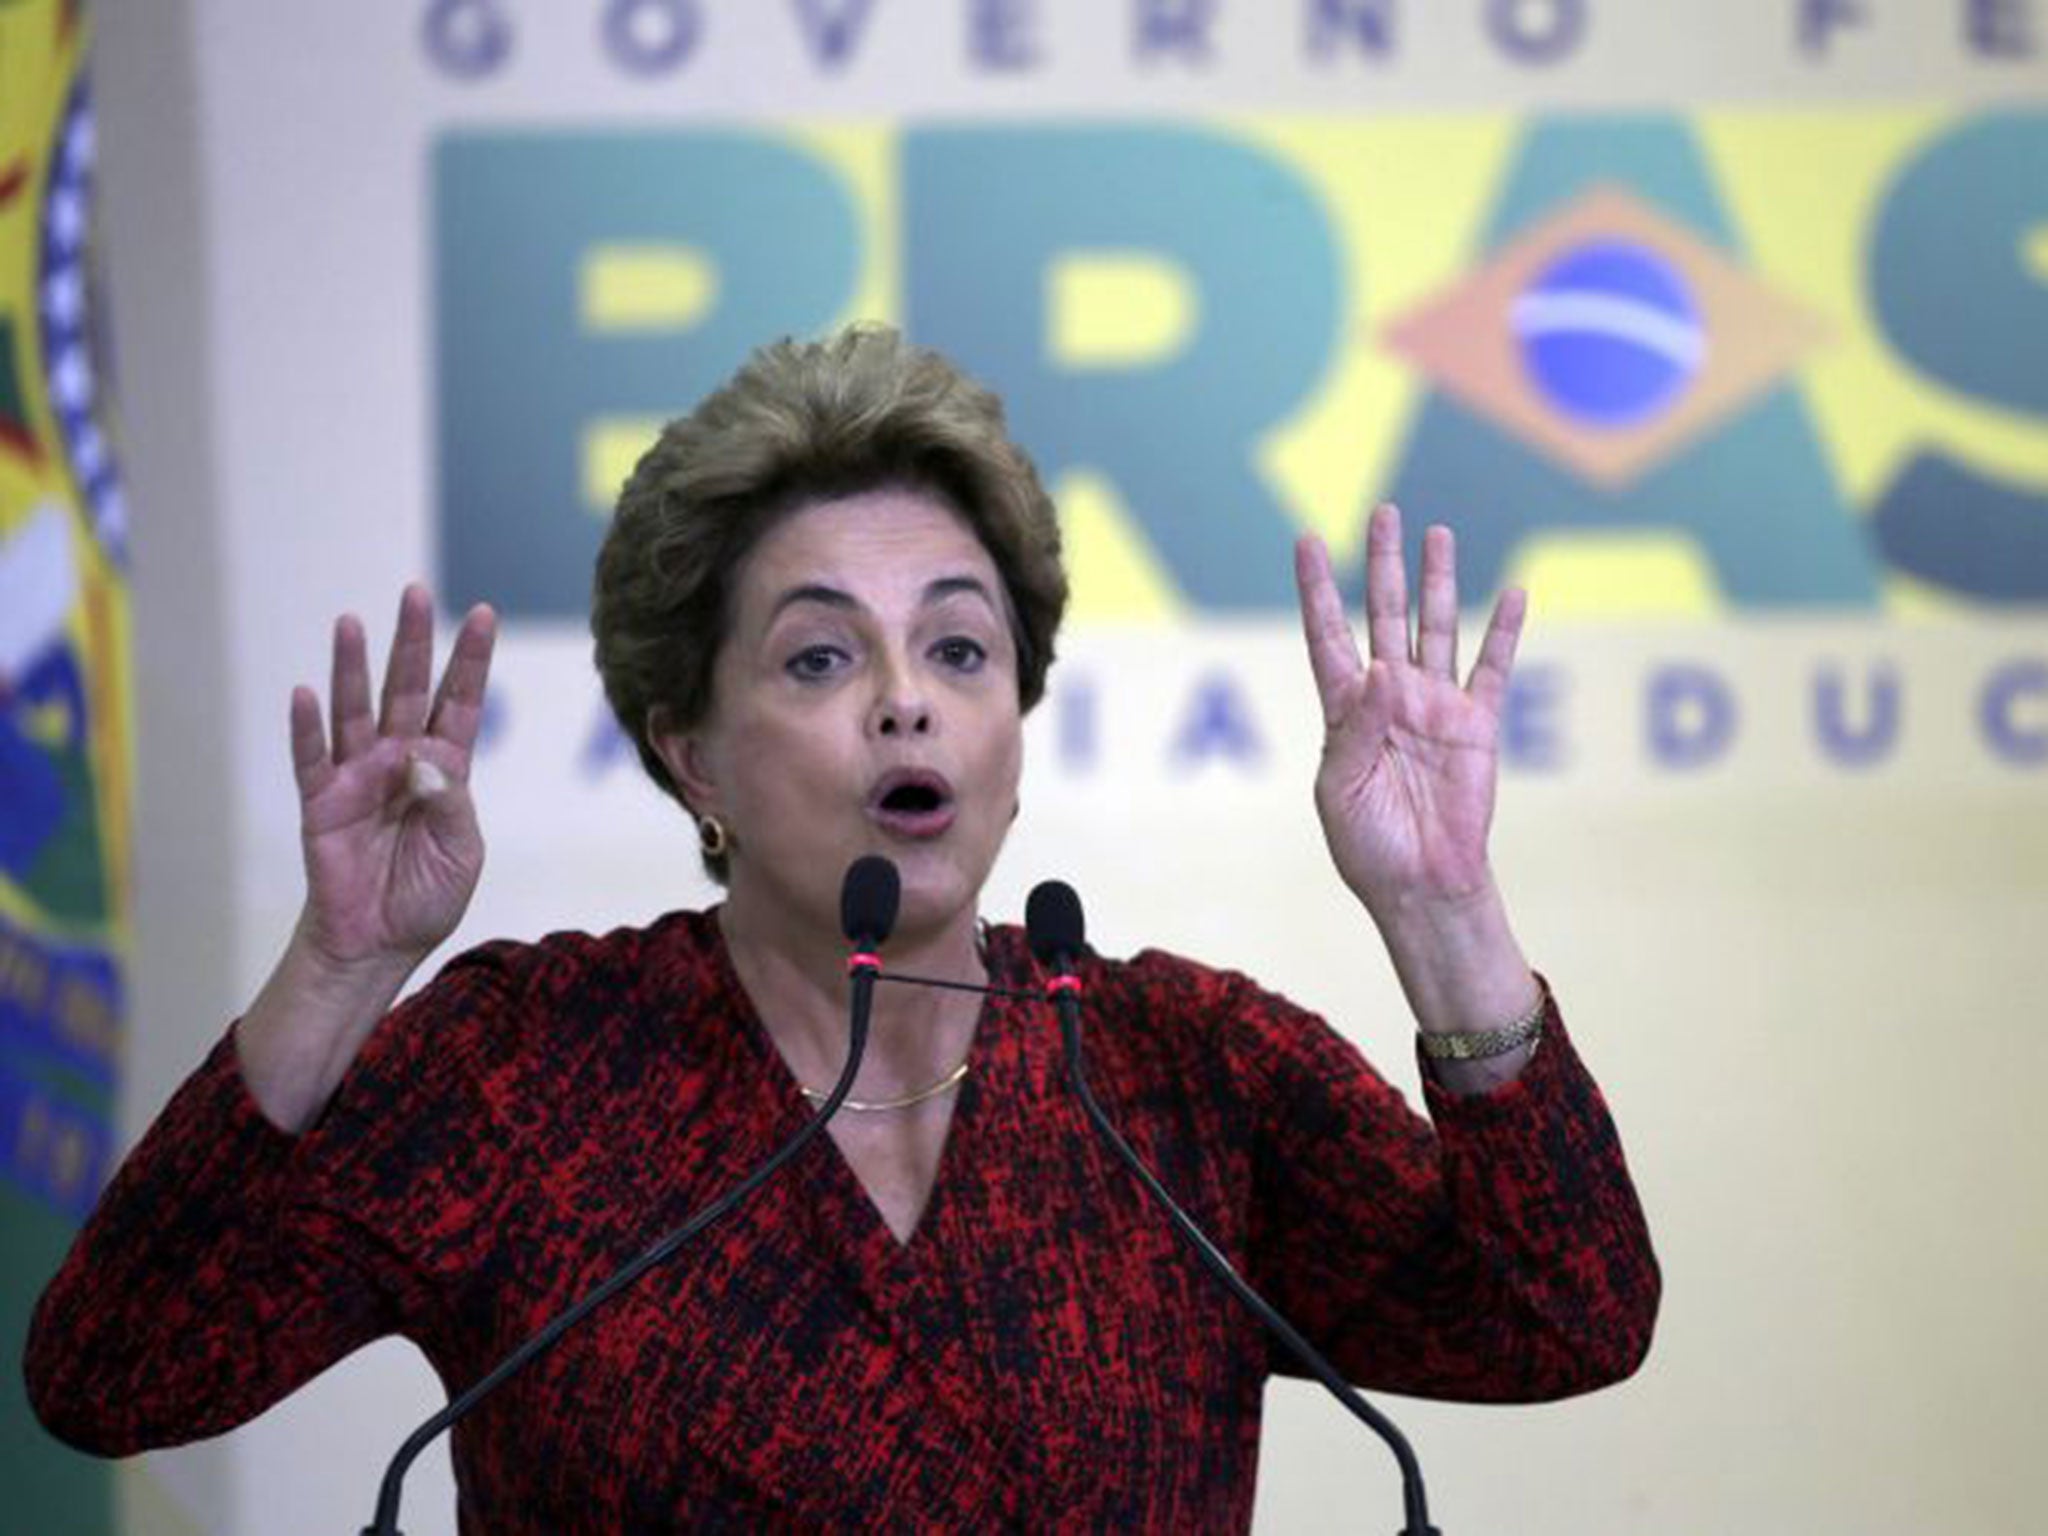 Brazil’s Senate suspended President Dilma Rousseff from office in May